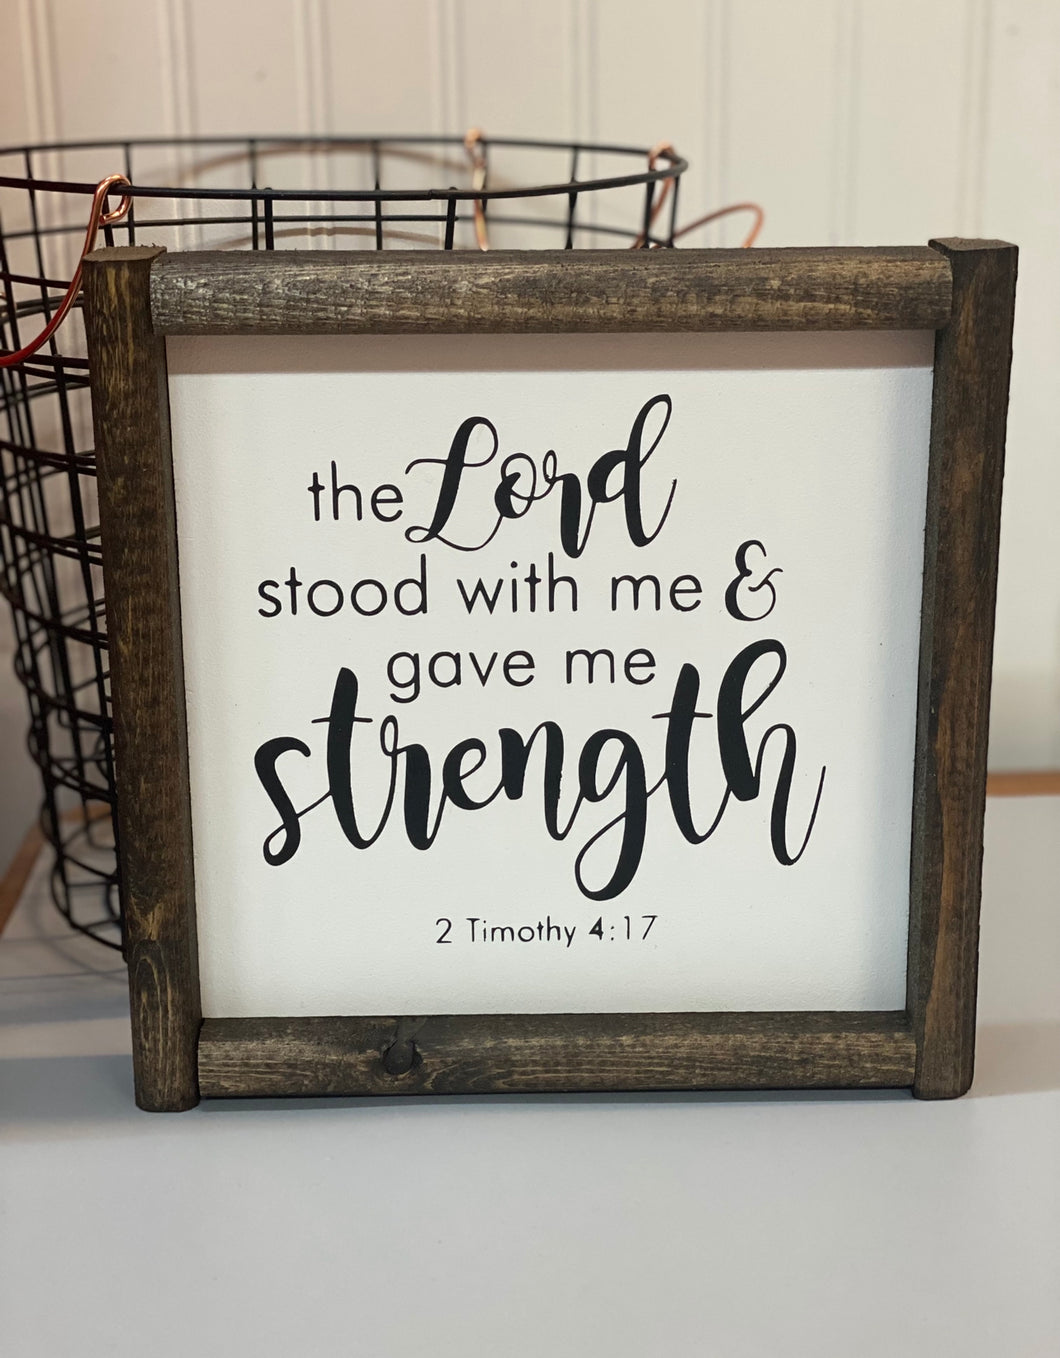 The Lord stood with me & gave me strength 2 Timothy 4:17